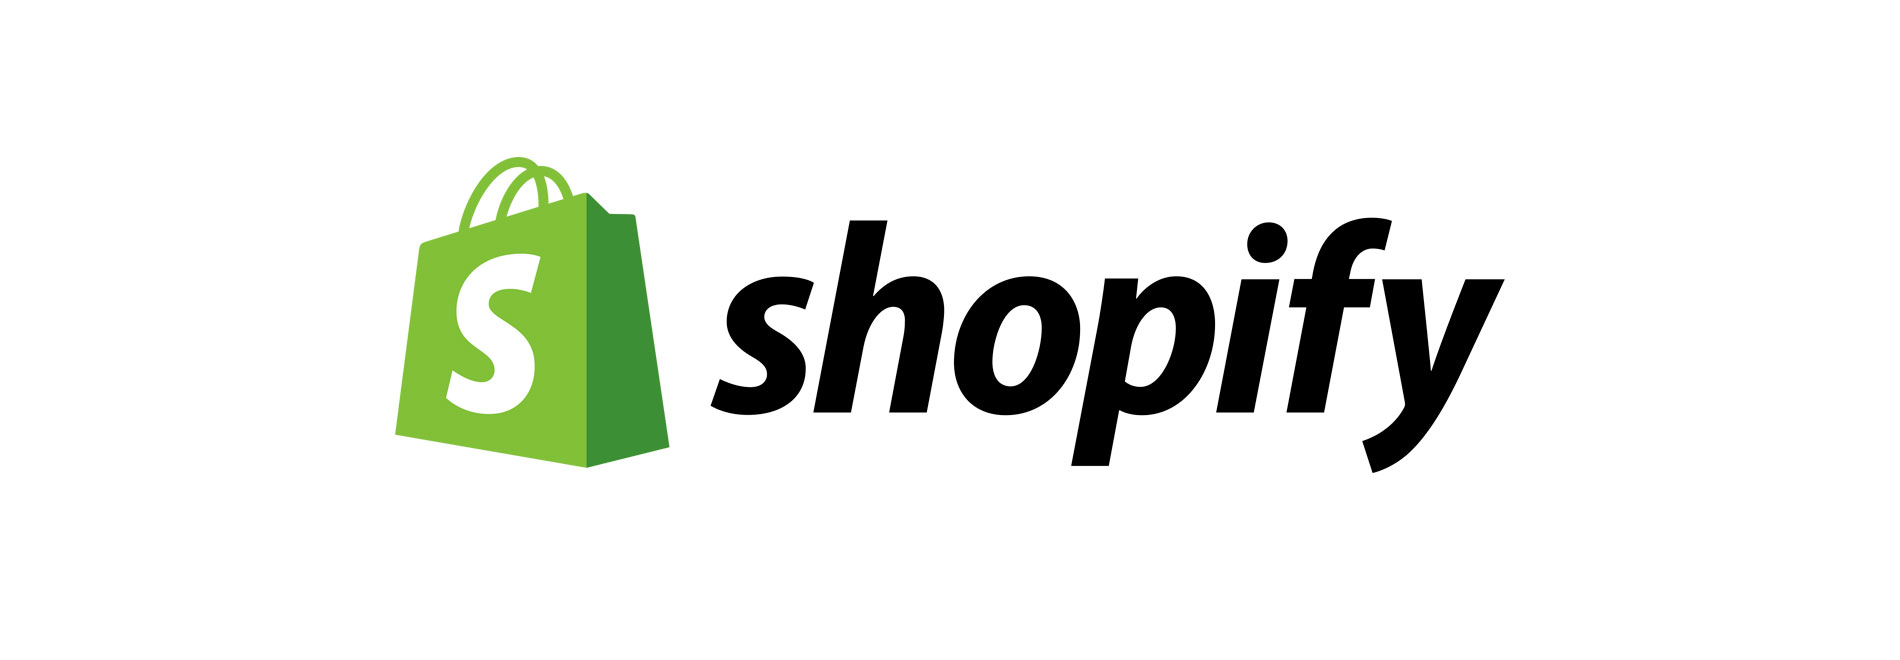 Start a Shopify store in less than 10 minutes